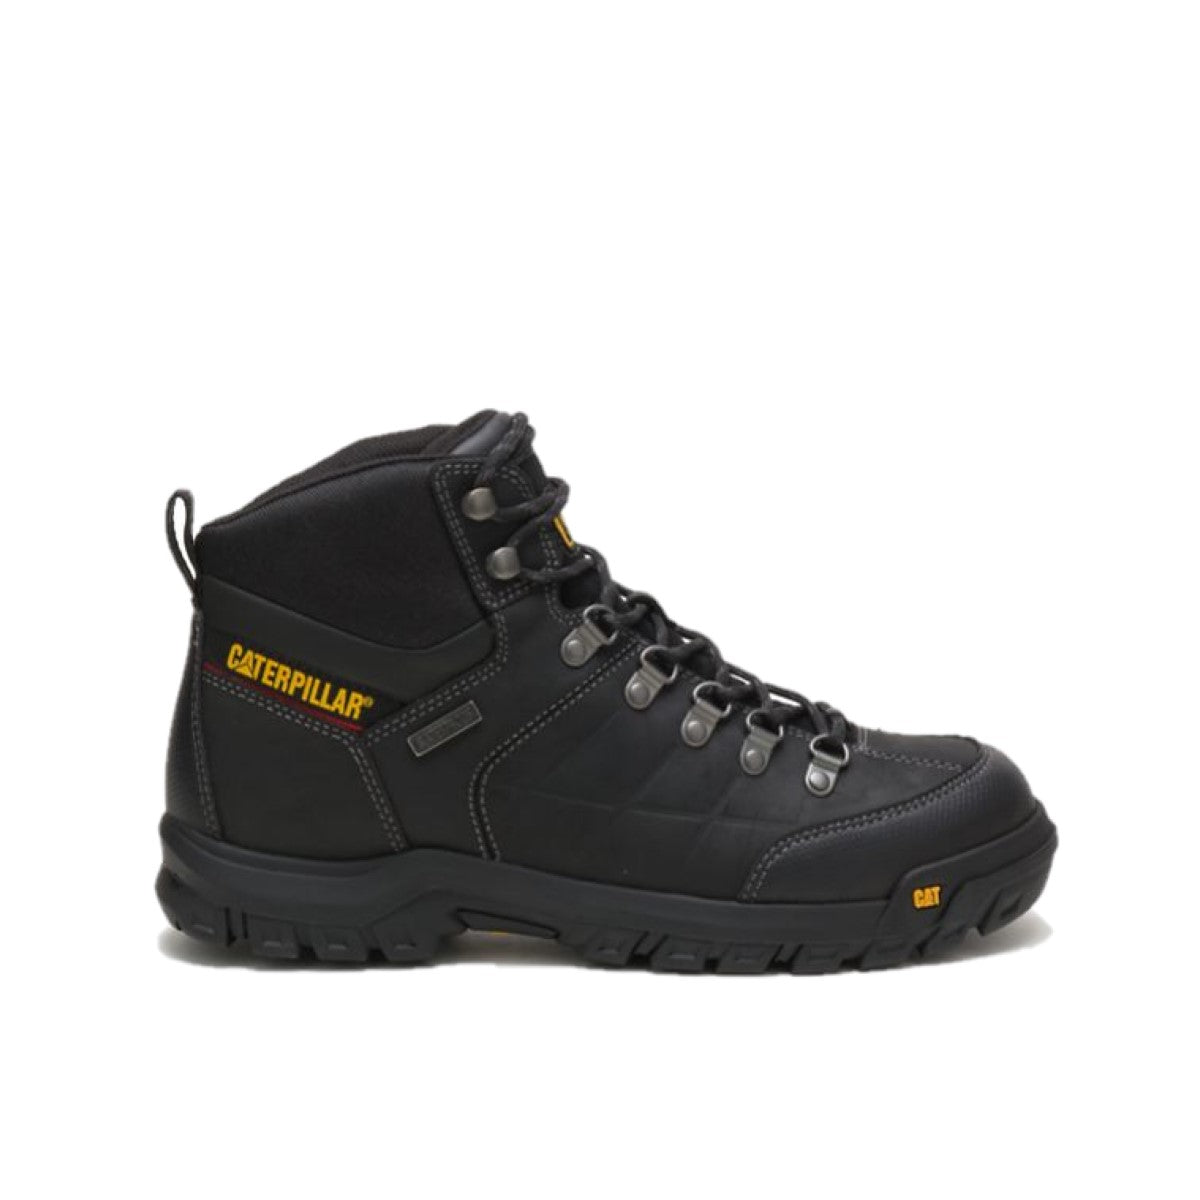 CATERPILLAR P90936-W THRESHOLD WP ST MN'S (Wide) Black Leather Work Boots